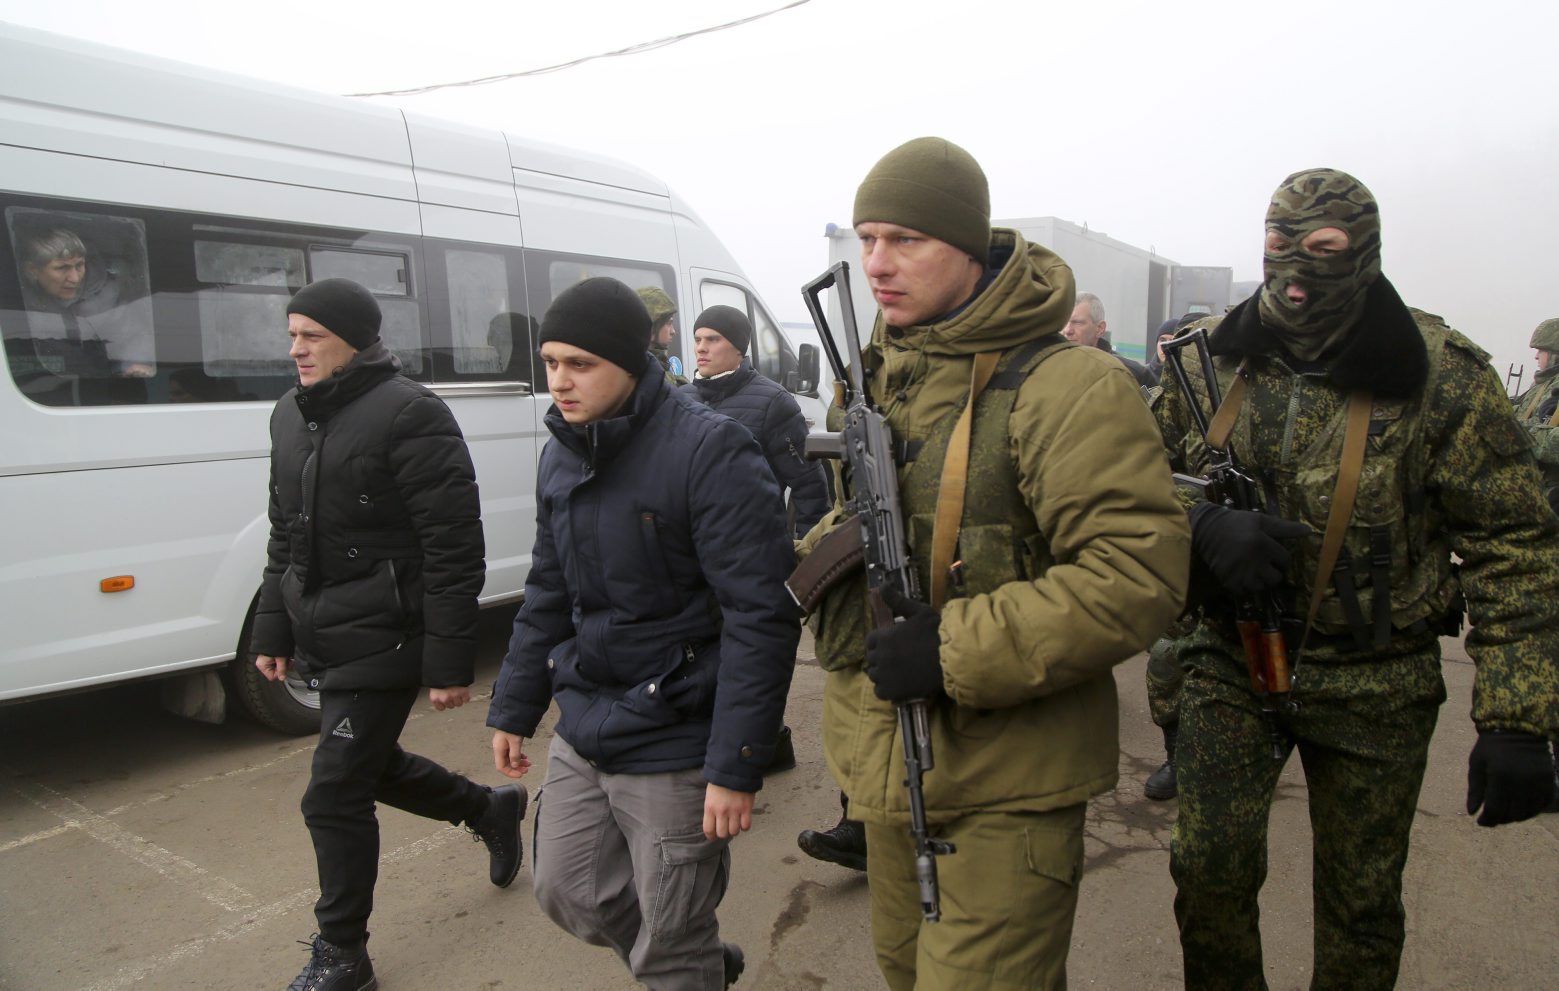 Ukrainian war prisoners escorted by armed Russia-backed separatist soldiers walk to buses to be exchanged near the checkpoint Horlivka, eastern Ukraine, Sunday, Dec. 29, 2019. Ukrainian forces and Russia-backed rebels in eastern Ukraine have begun exchanging prisoners in a move aimed at ending their five-year-long war. The move is part of an agreement brokered earlier this month at a summit of the leaders of Ukraine, Russia, Germany and France. (AP Photo/Alexei Alexandrov) Ukraine Russia Prisoners